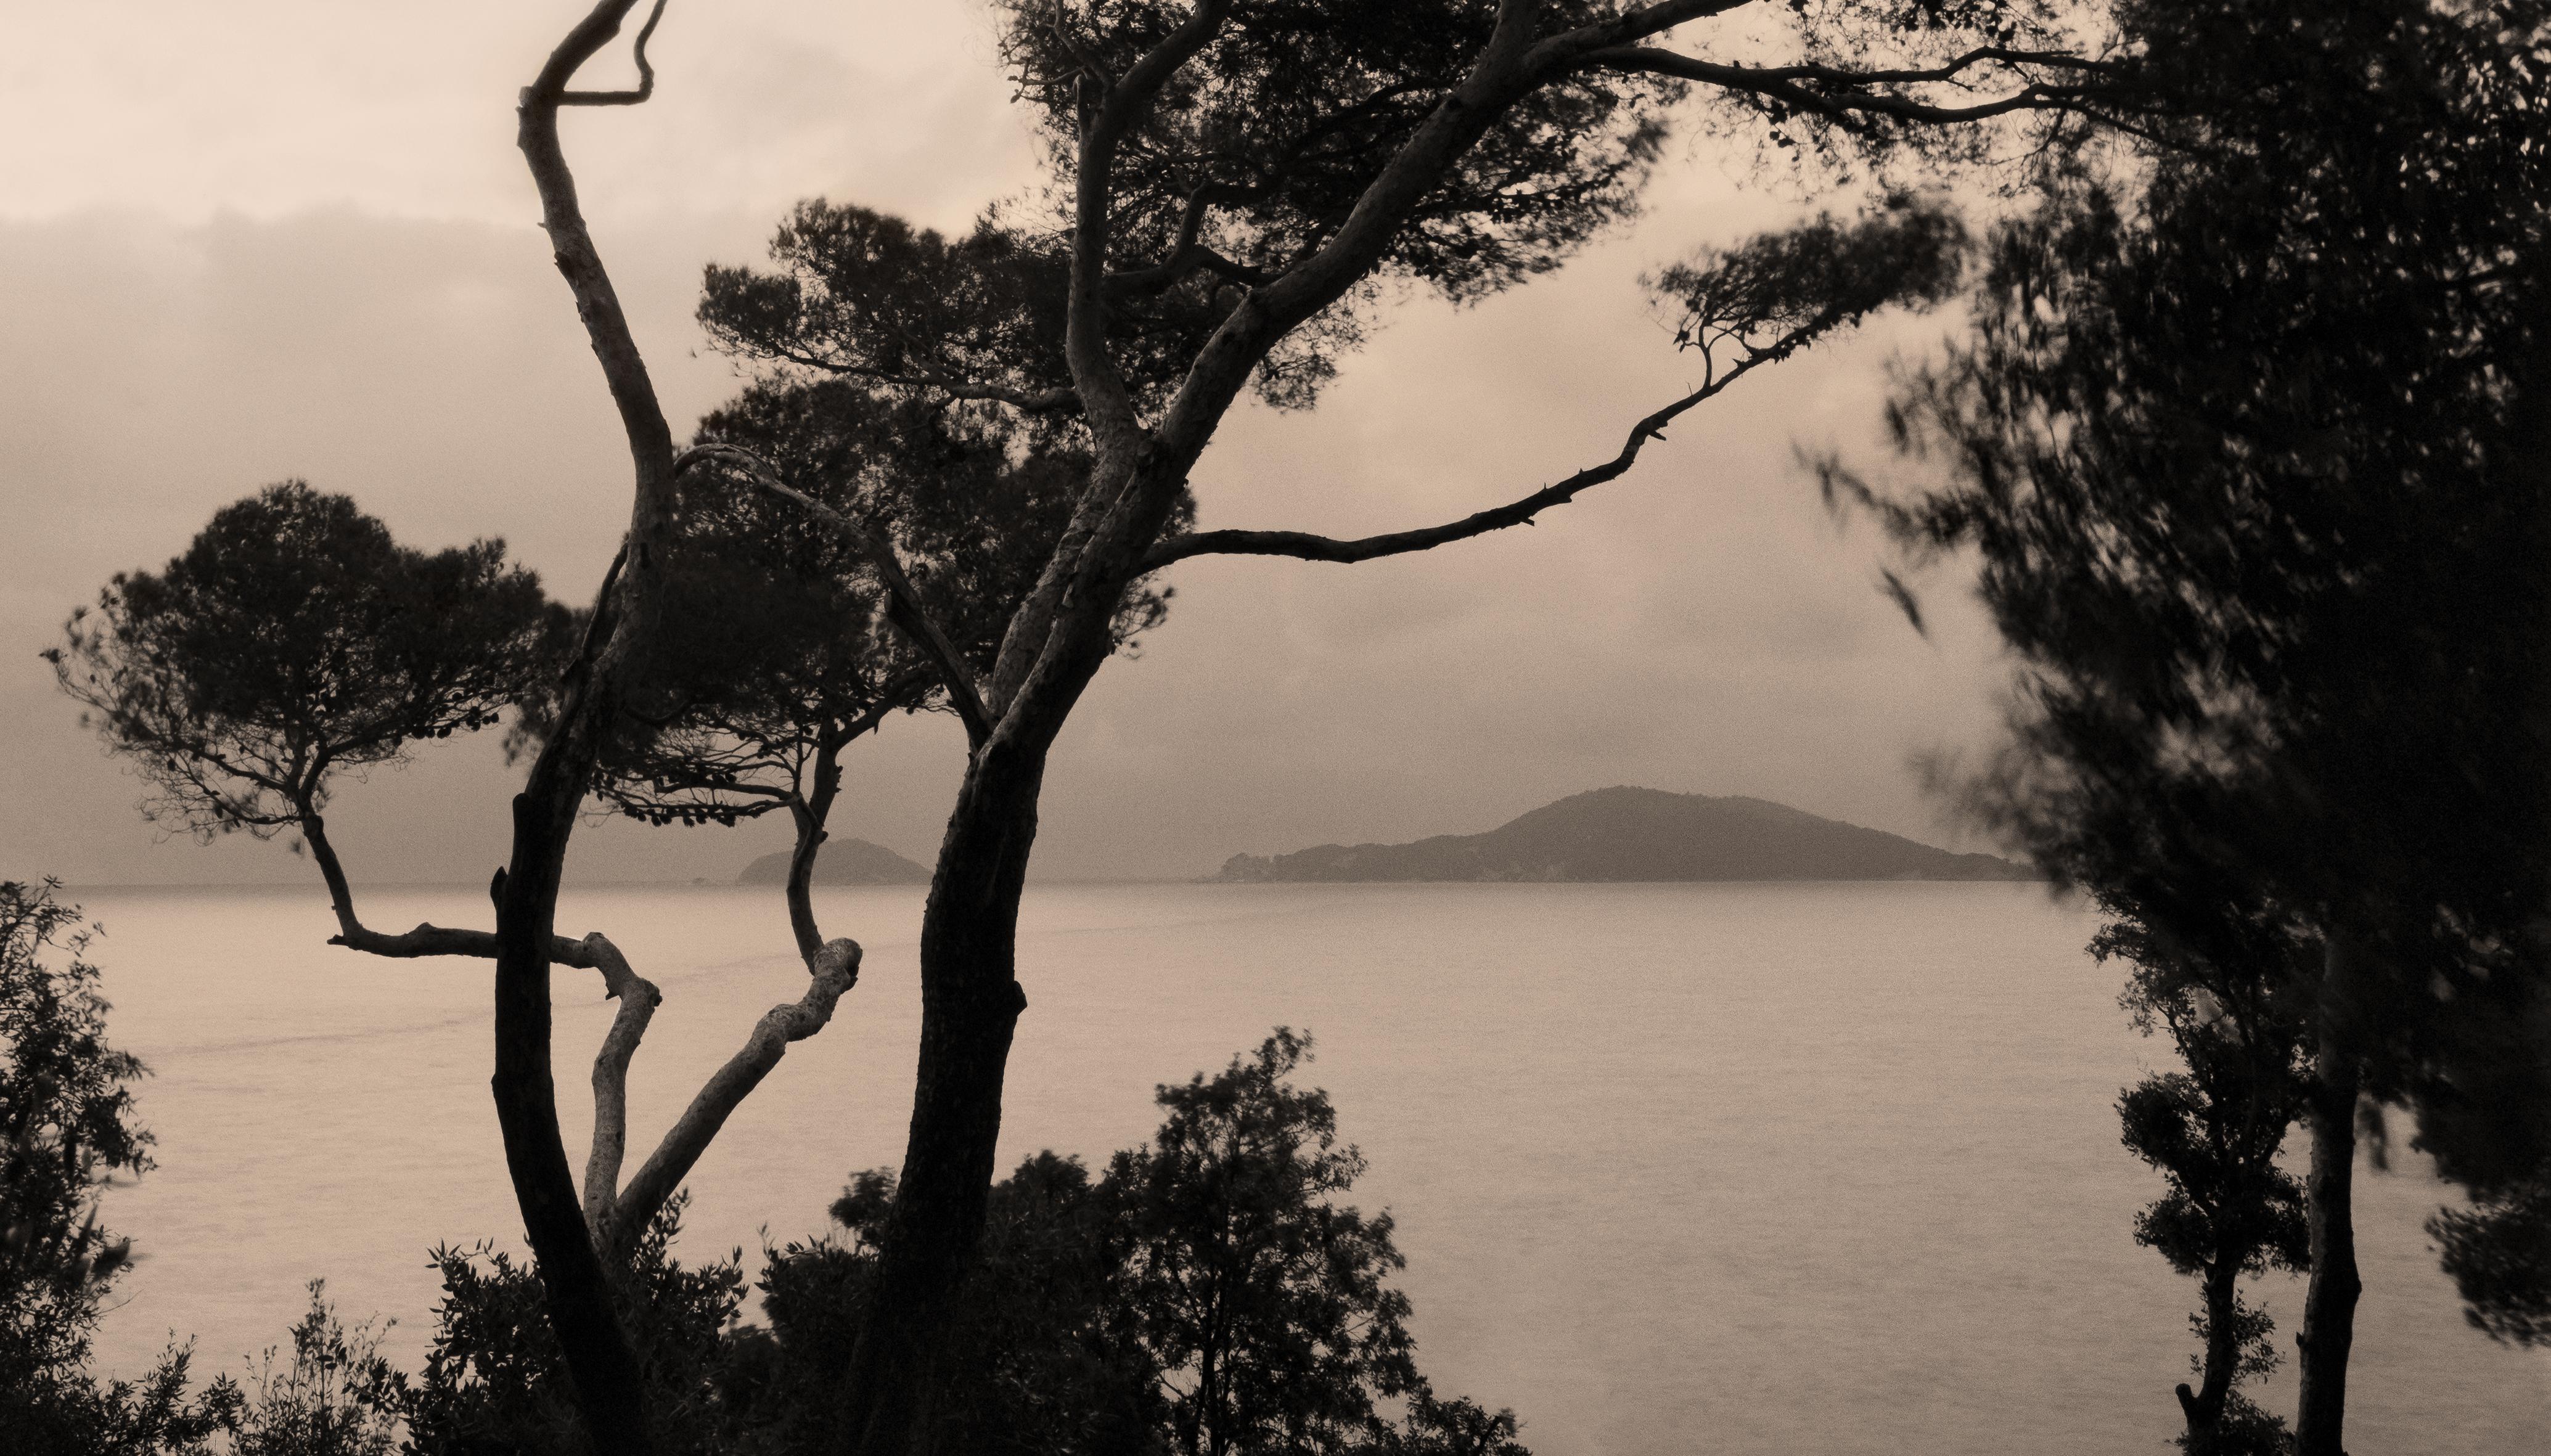 Currents - analogue landscape photography of Italian riviera